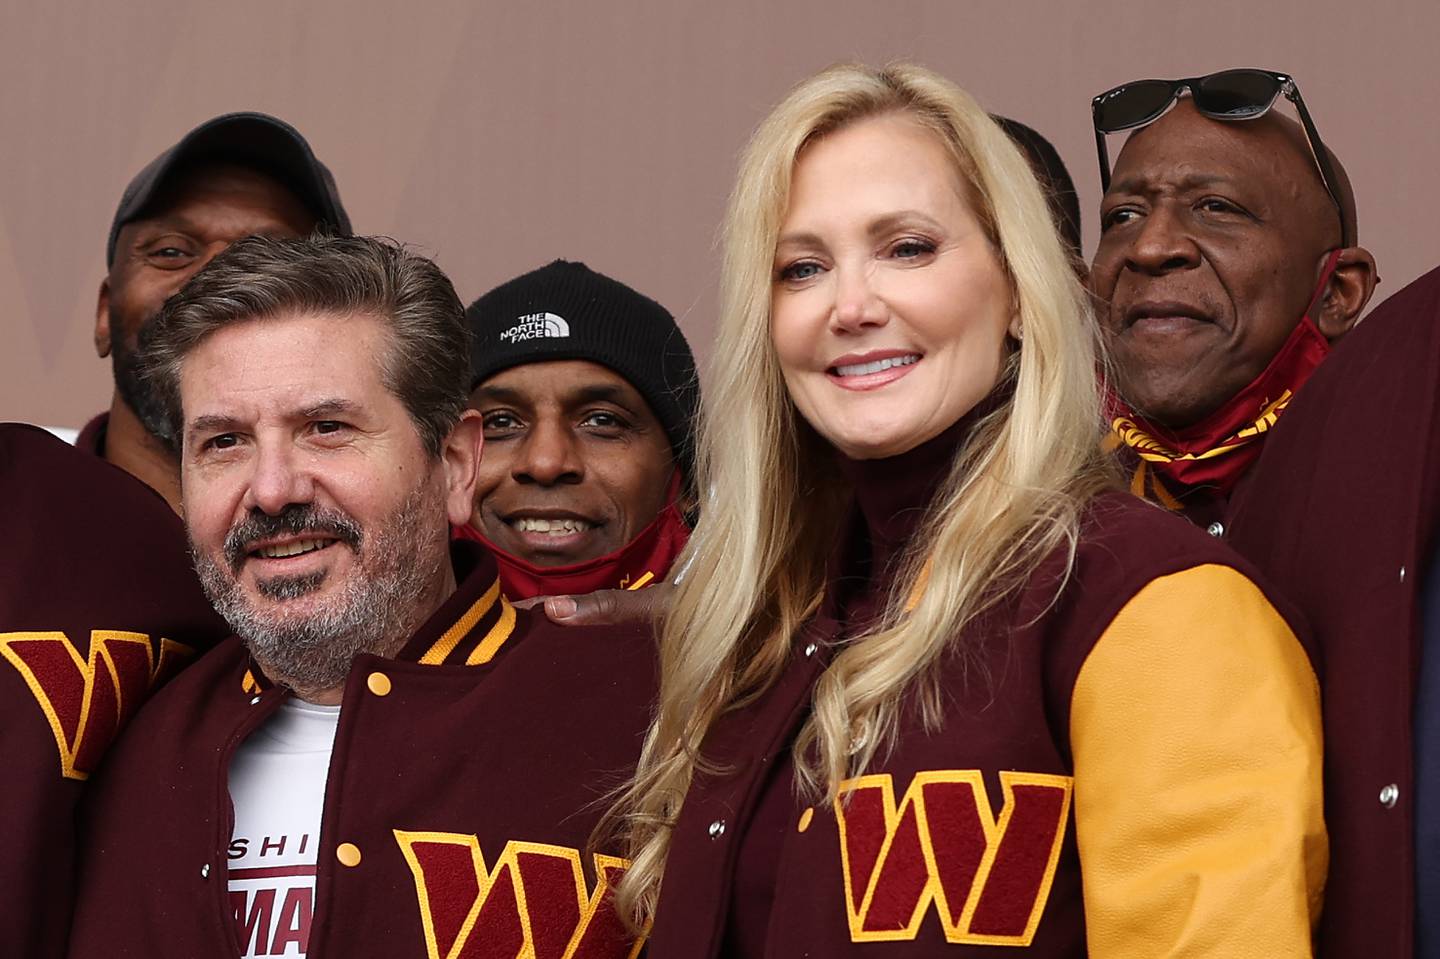 Dan Snyder and his wife Tanya are both wearing burgundy and gold letterman-style Commanders jackets, surrounded by other members of the organization.